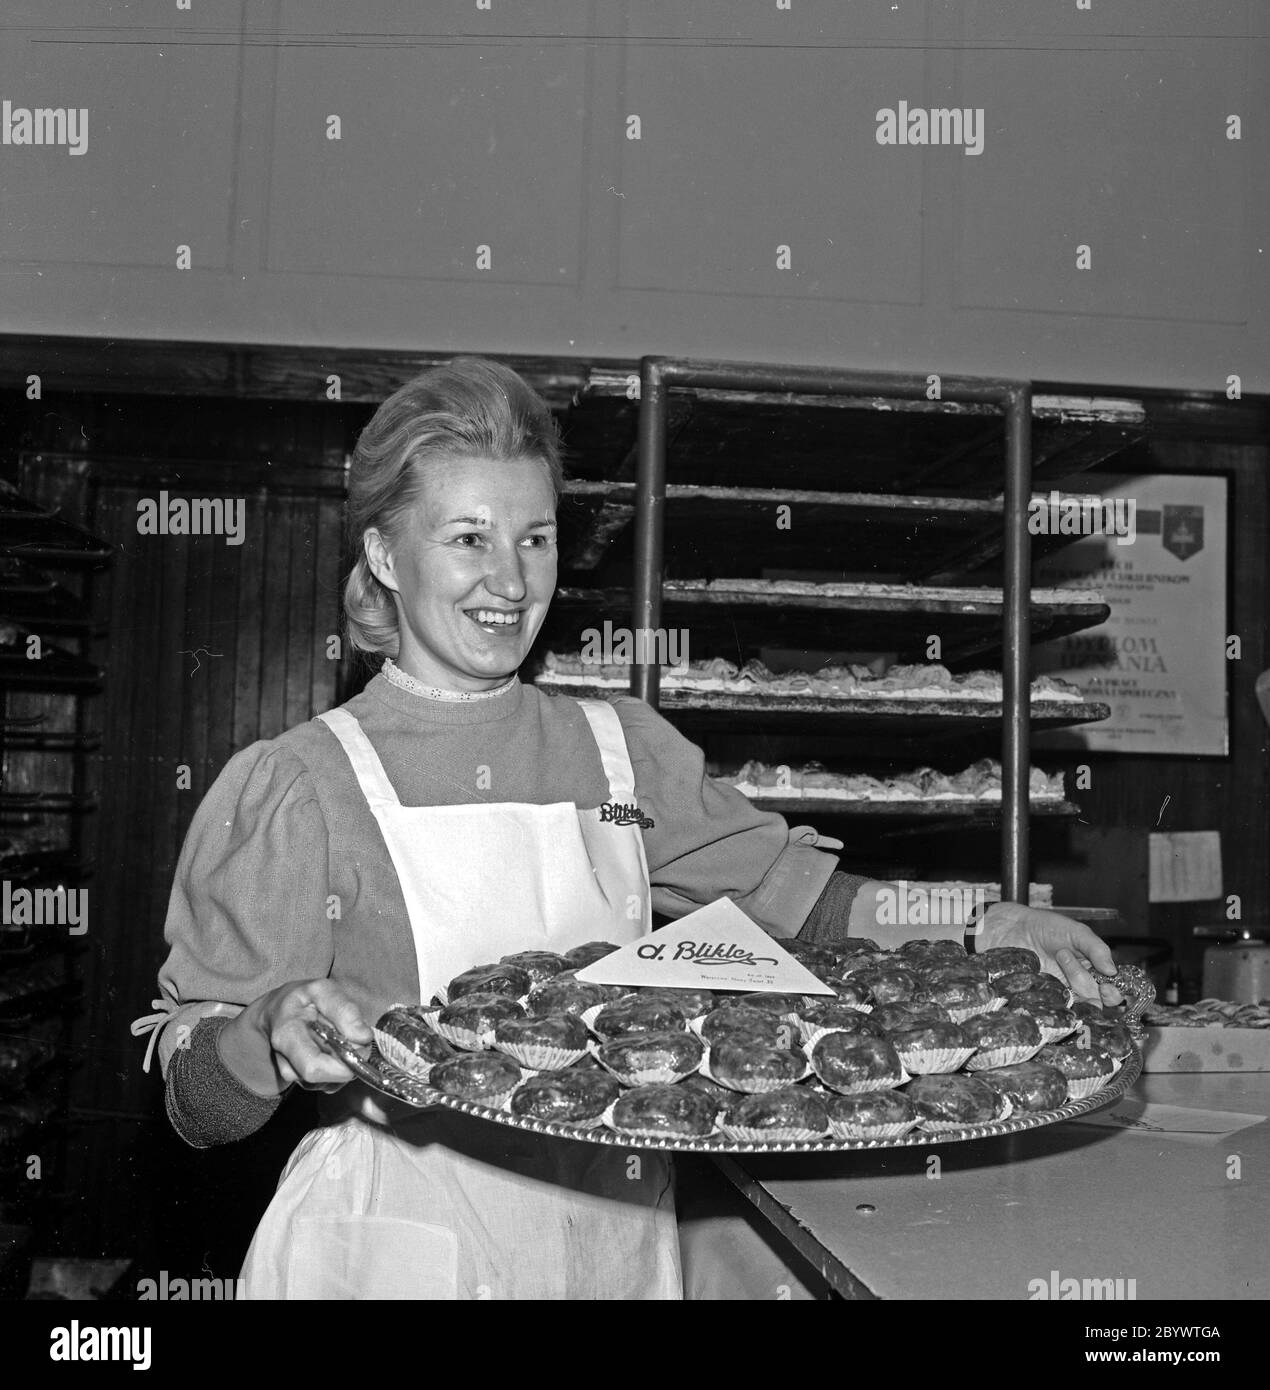 A woman carrying a platter of pączki (filled doughnuts) at Blikle pastry shop in Warsaw ca. 1969-1978 Stock Photo